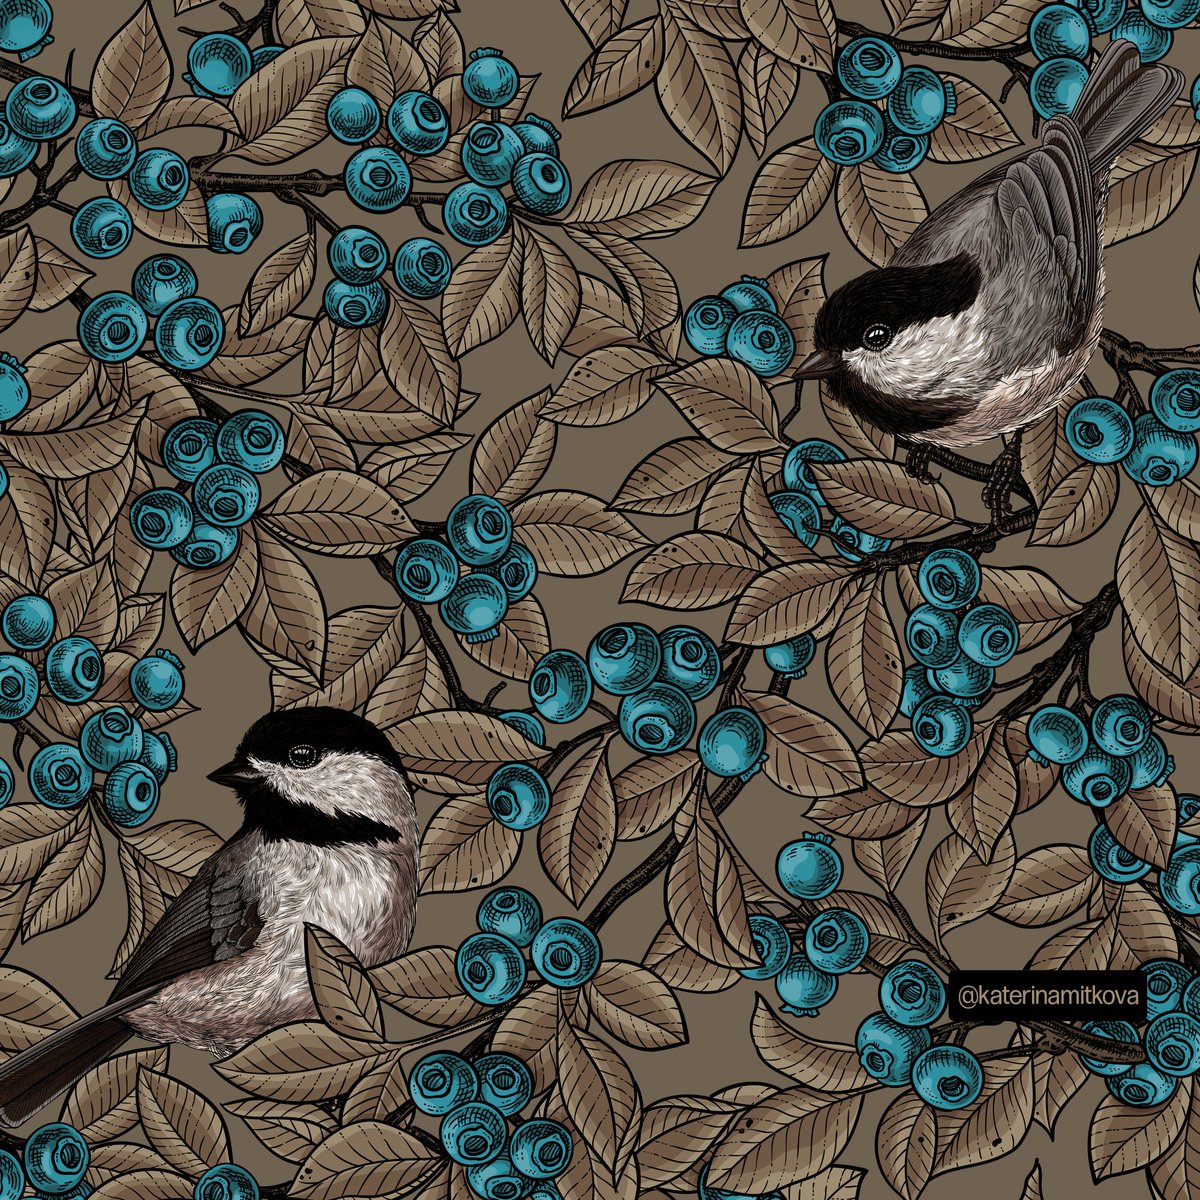 These 2 new colorways of my pattern Chickadees and blueberries are new arrivals in my Spoonflower shop

#Spoonflower #Spoonflowerfabric #spoonflowerdesigner #fabric #fabricdesign  #Society6 #Redbubble #Teeepublic #Zazzle #pattern #surfacedesign #patternlove  #blueberrypattern